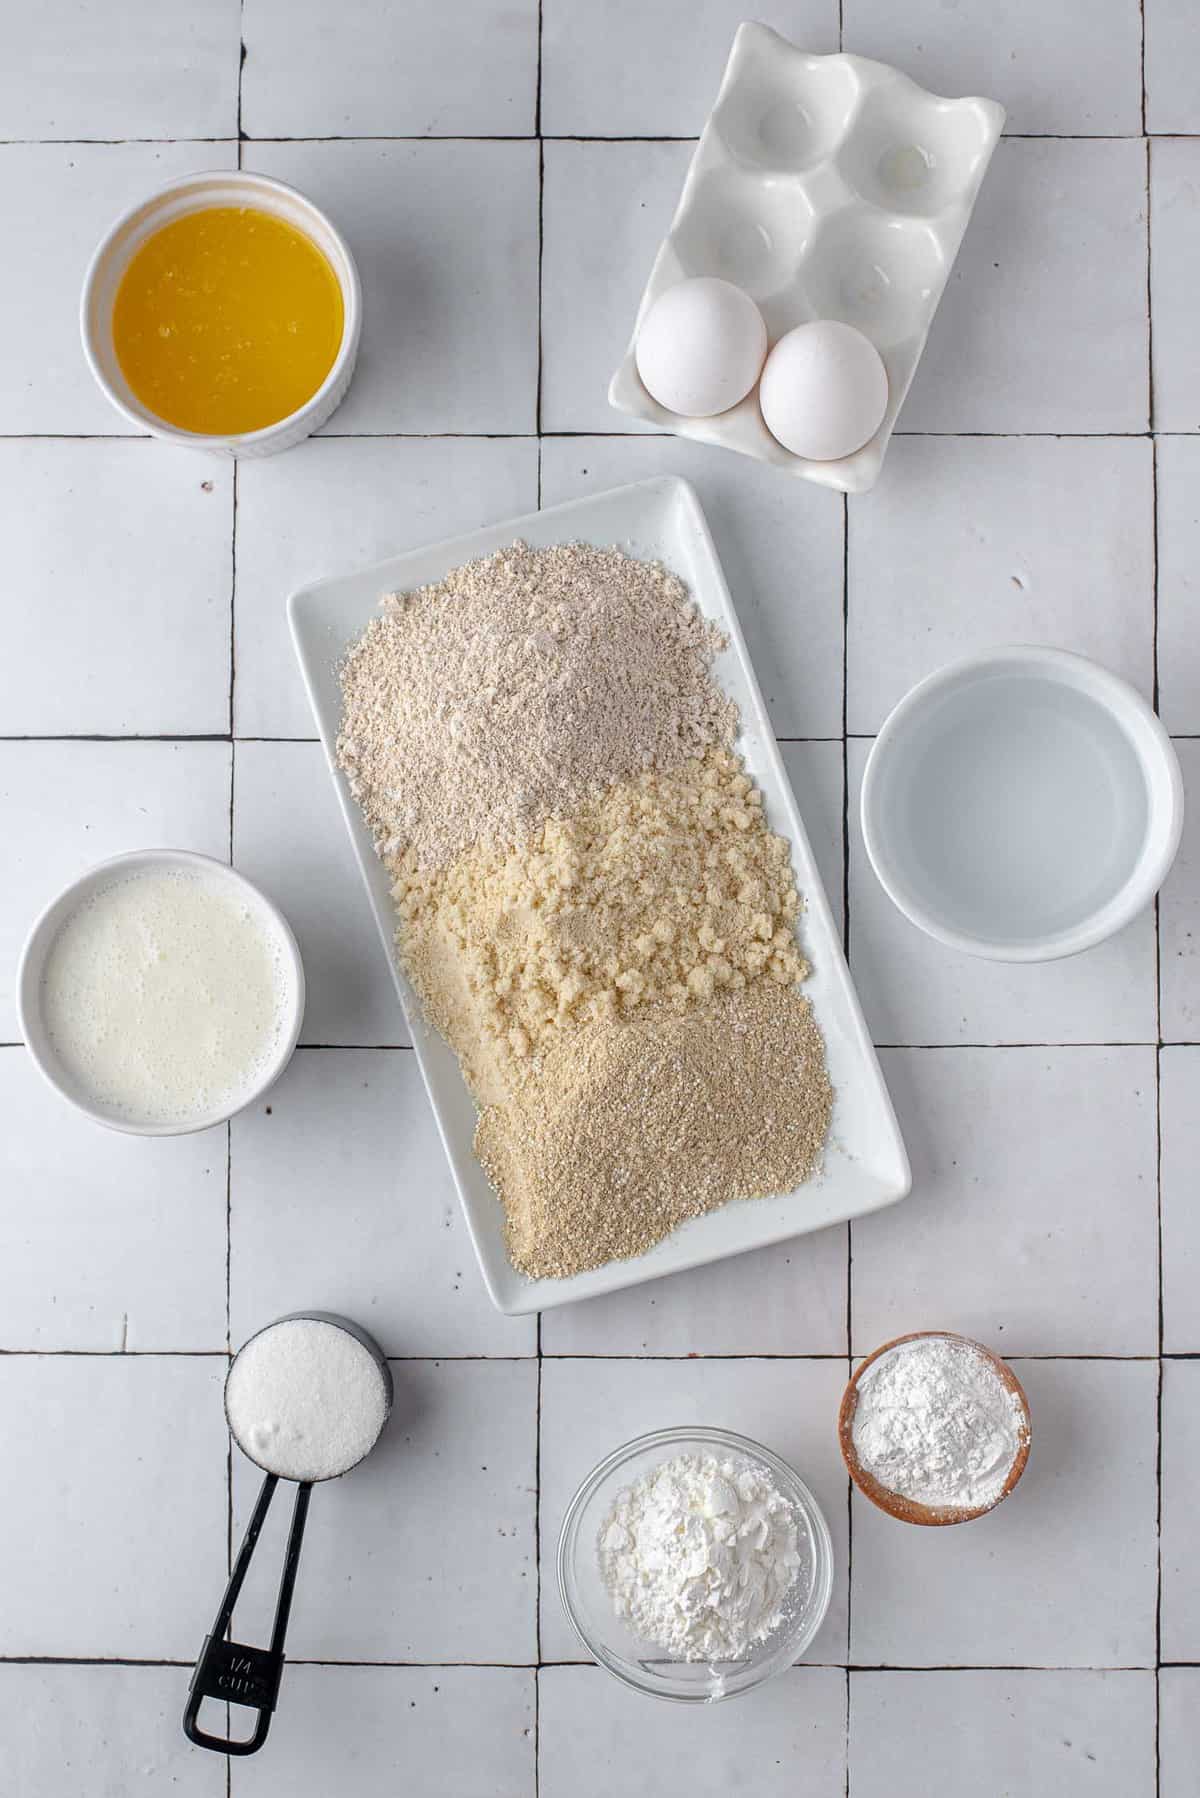 Overhead view of ingredients needed for recipe including three types of gluten-free flours.